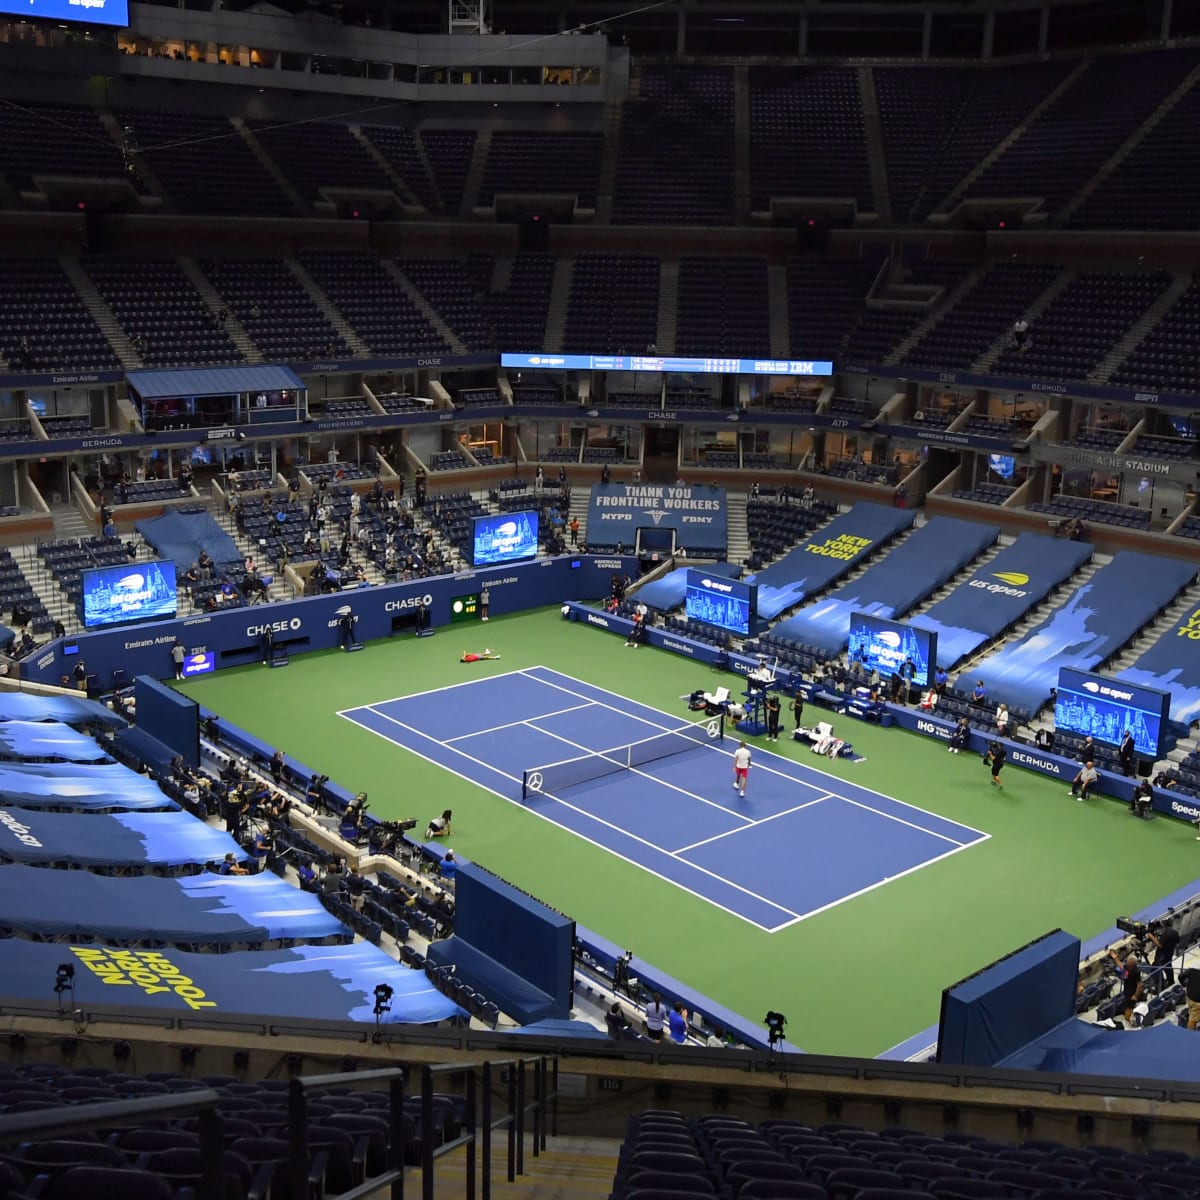 US Open tennis 2021: Insider tips for attending tennis at Flushing Meadows - Sports Illustrated